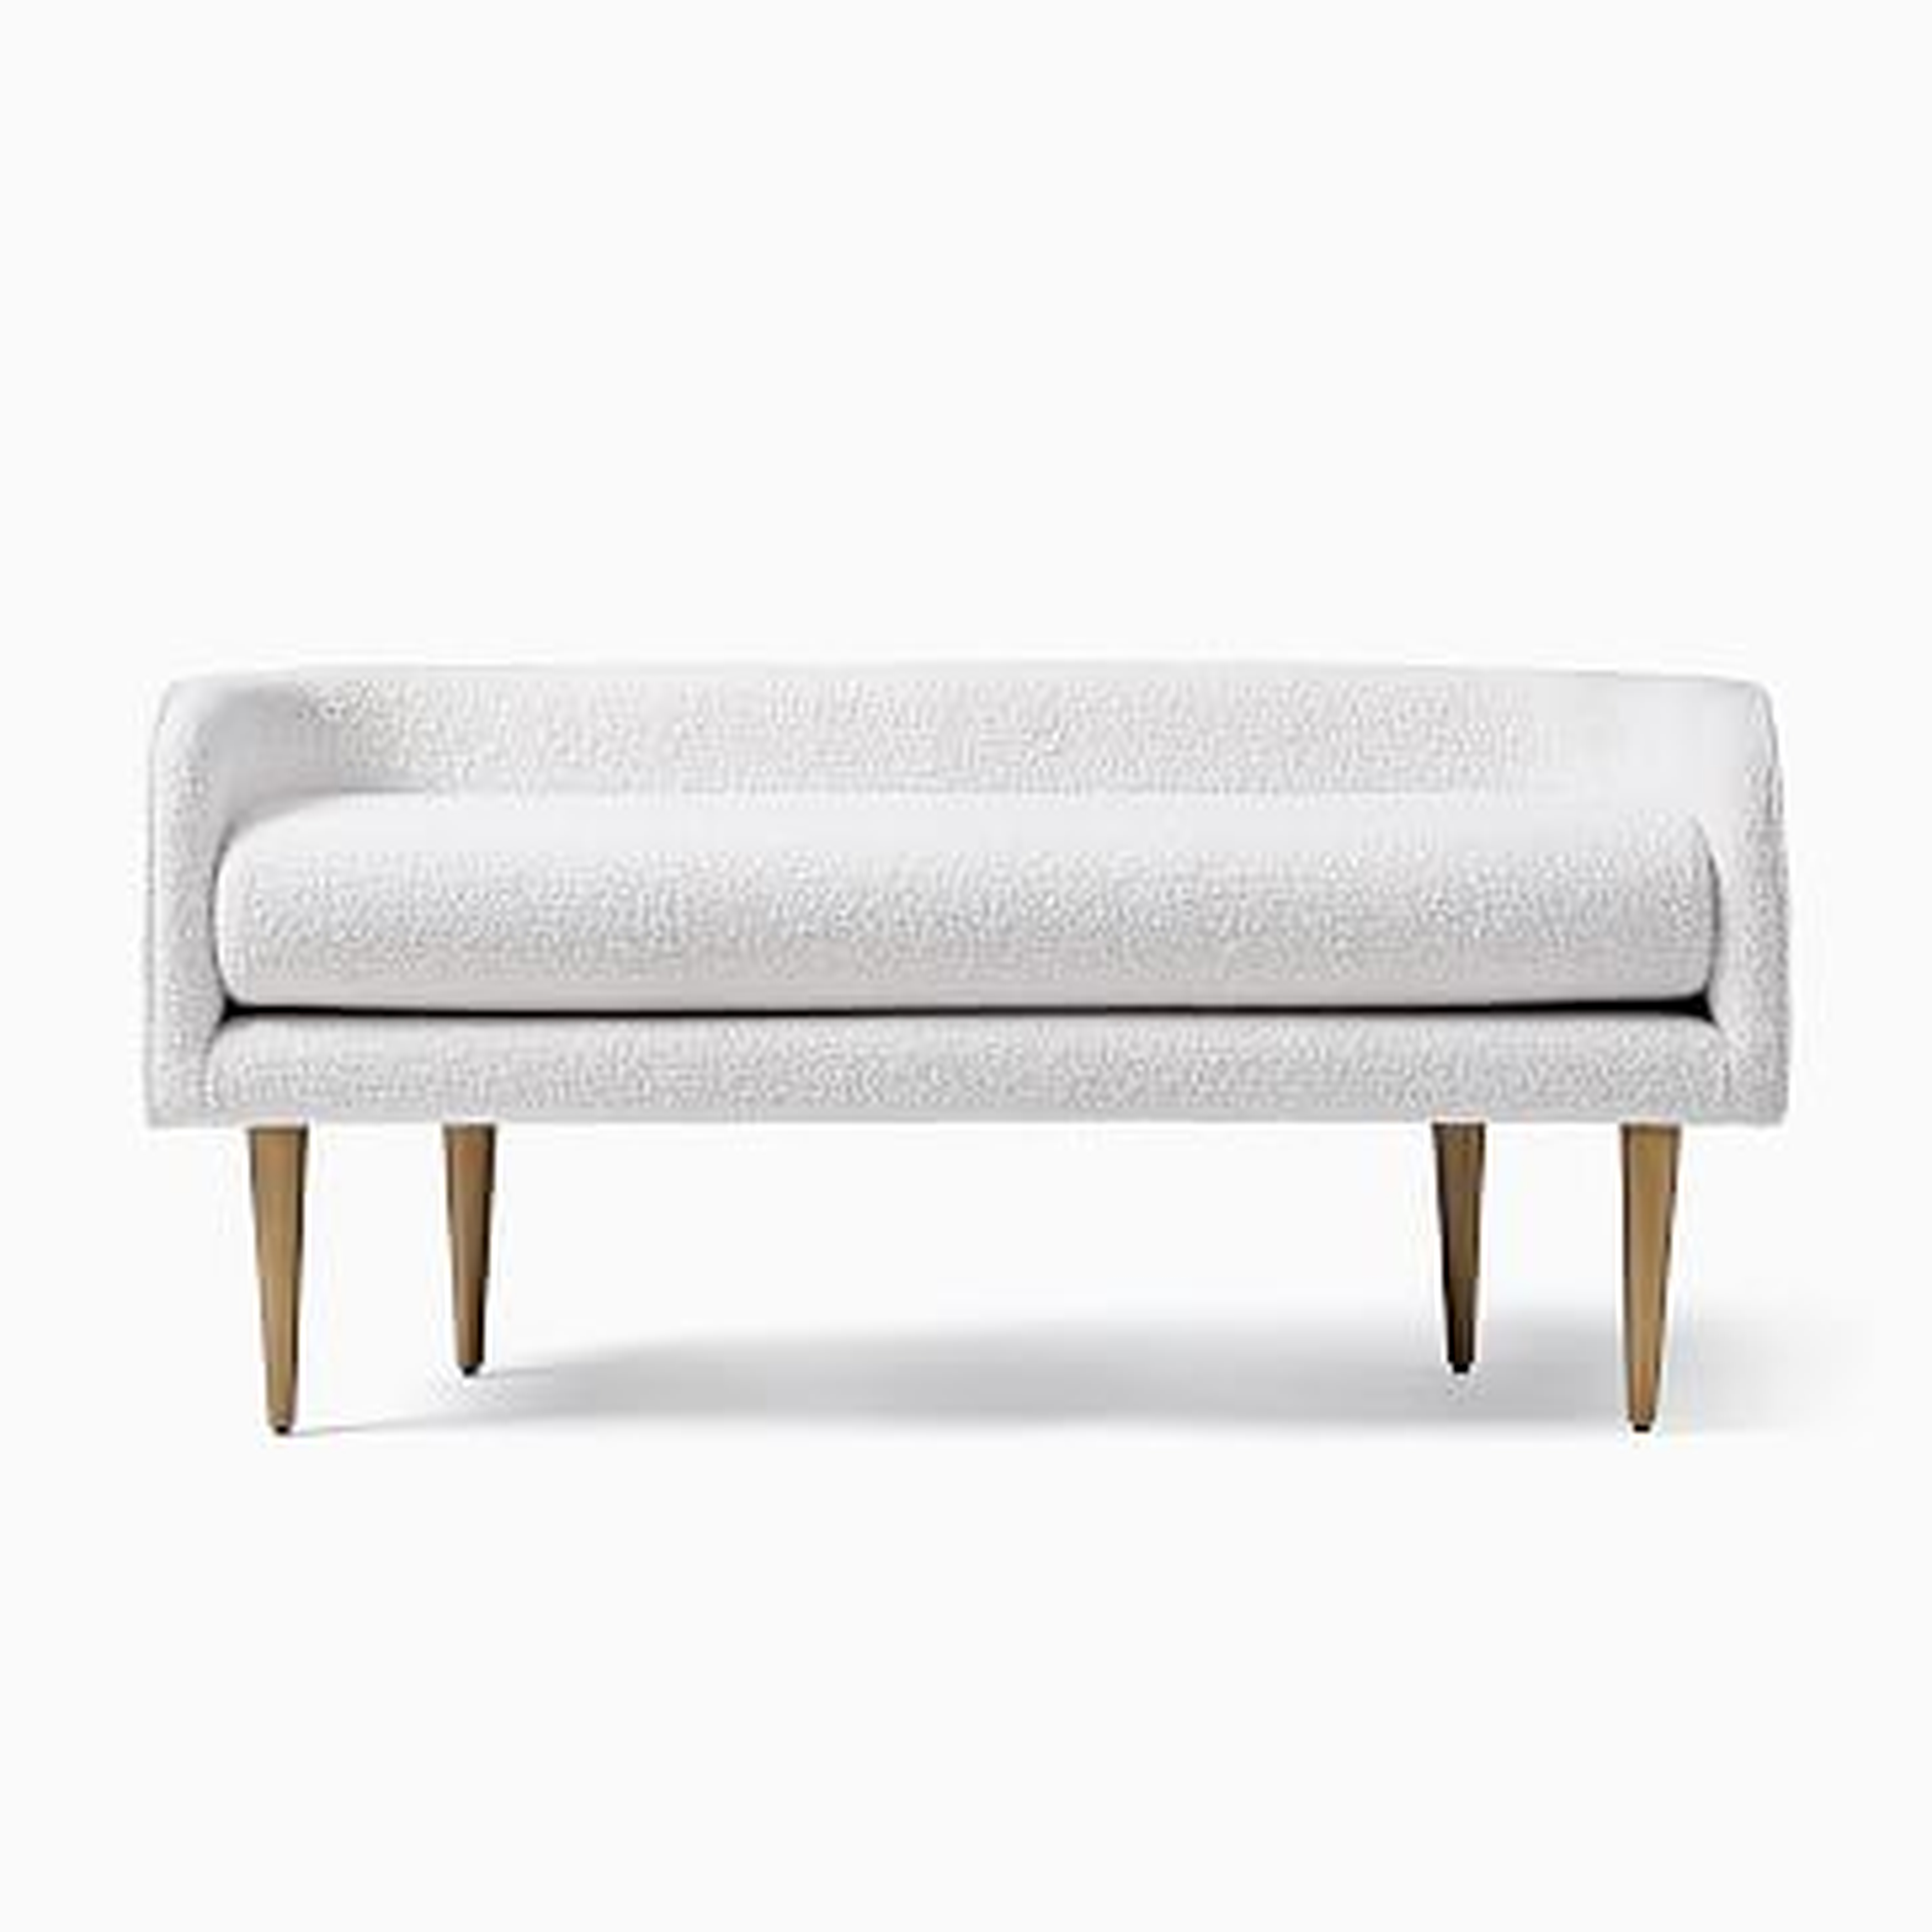 Celine Bench, Chunky Boucle, White - West Elm